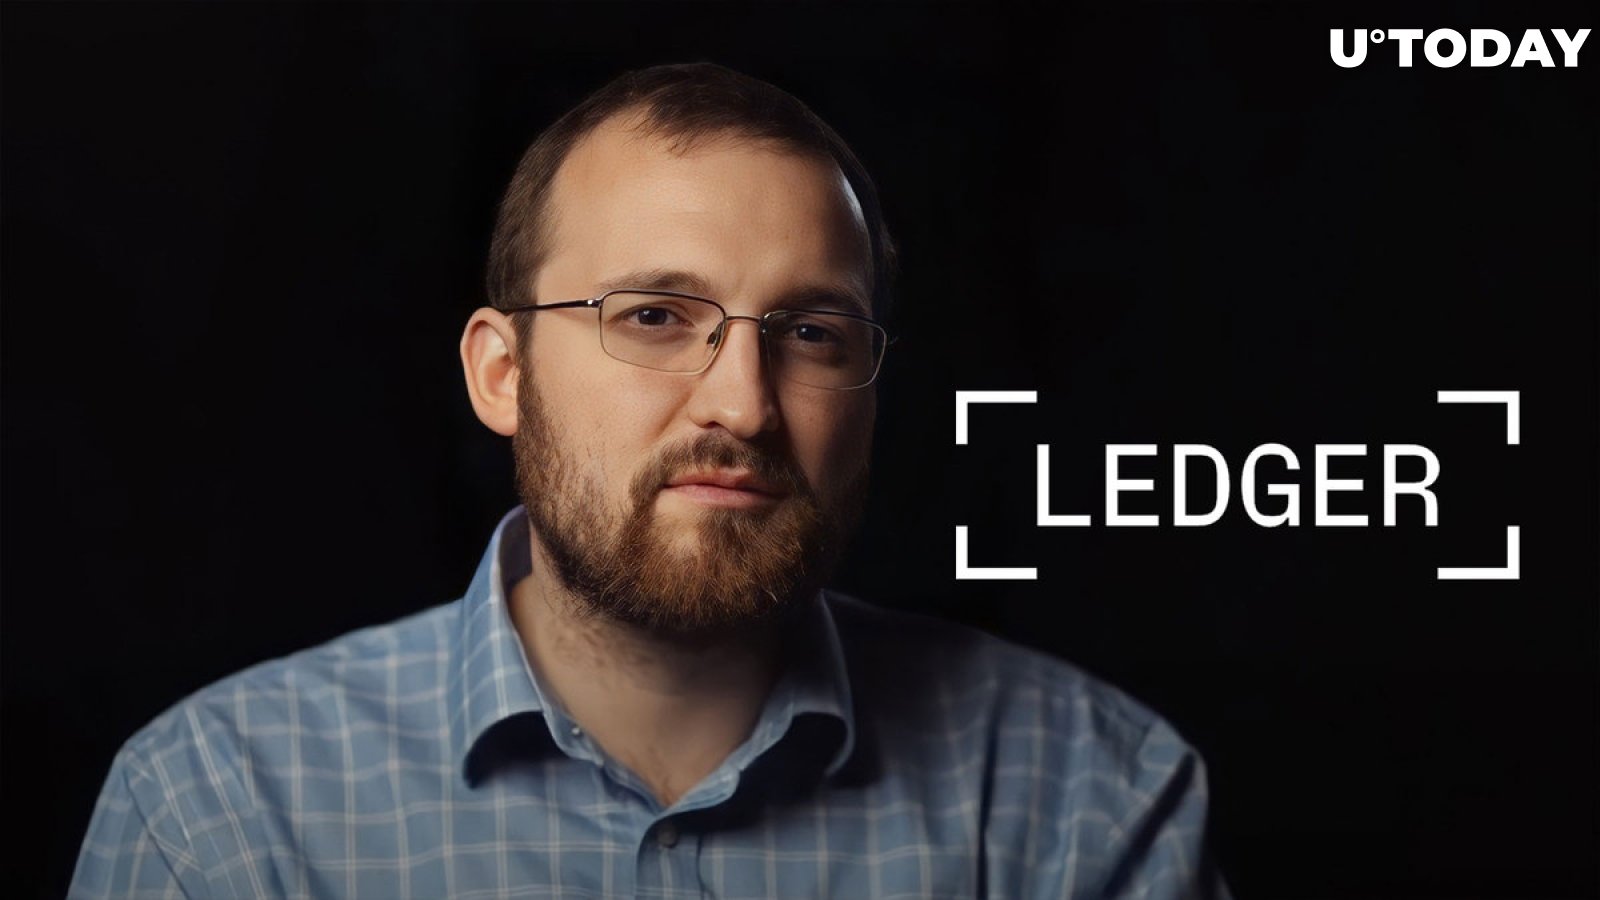 Cardano Founder Explains His Position on Ledger's Controversial Upgrade